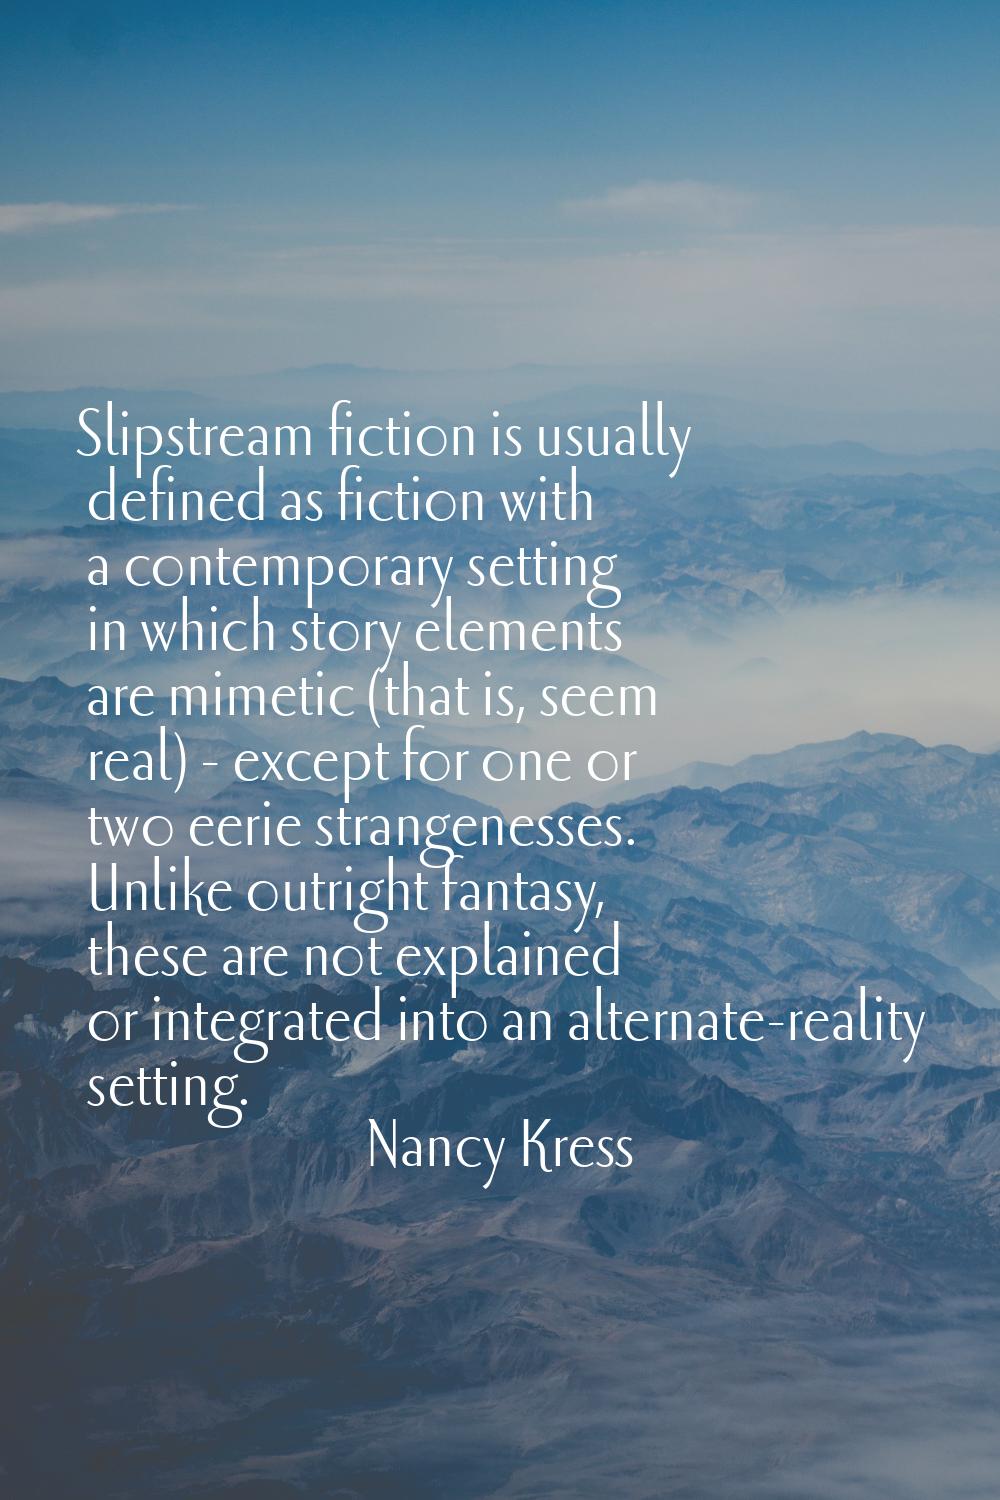 Slipstream fiction is usually defined as fiction with a contemporary setting in which story element